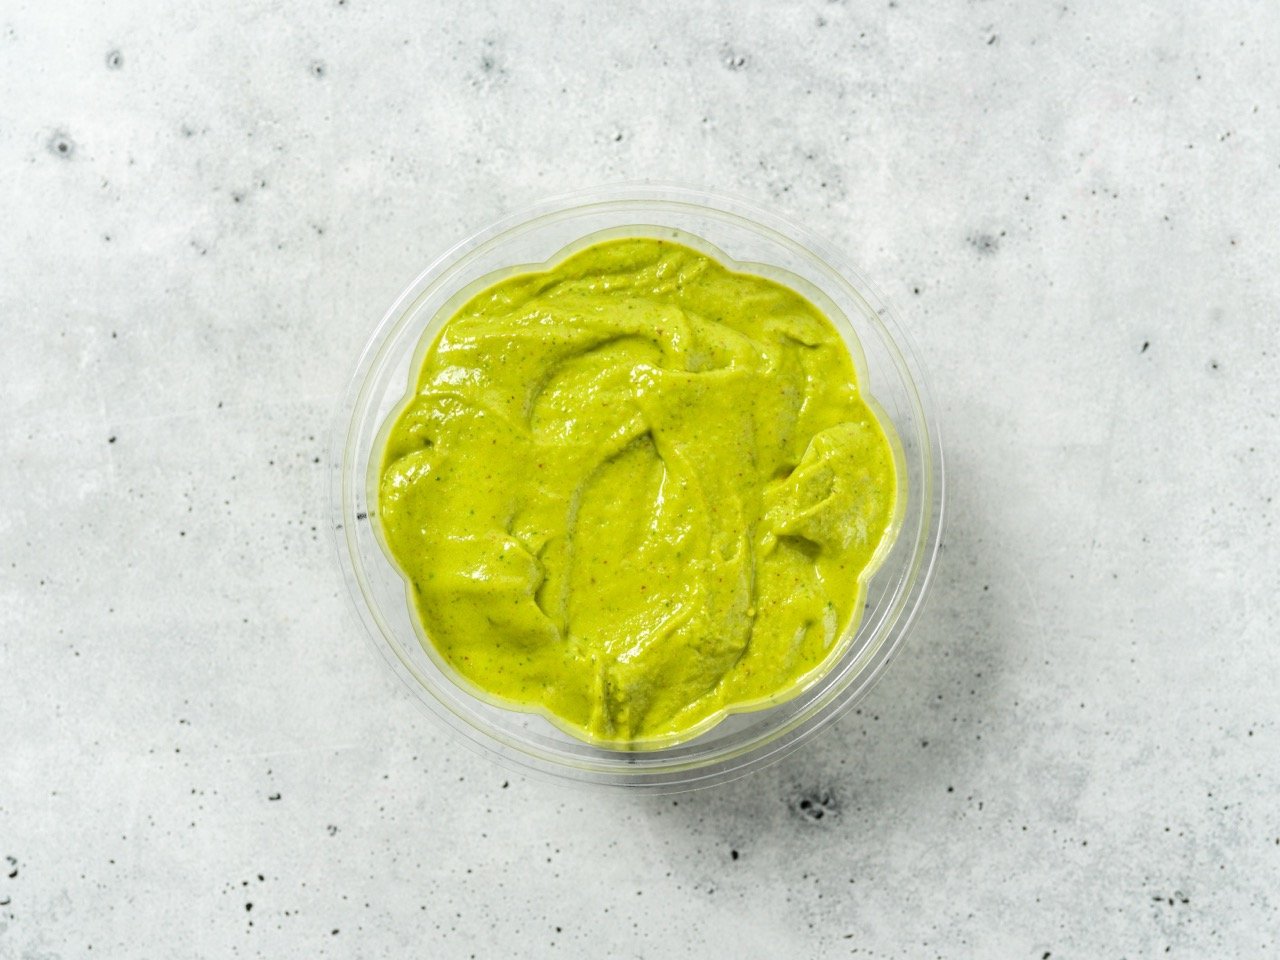  The bowl contains a vibrant green smoothie mix. 